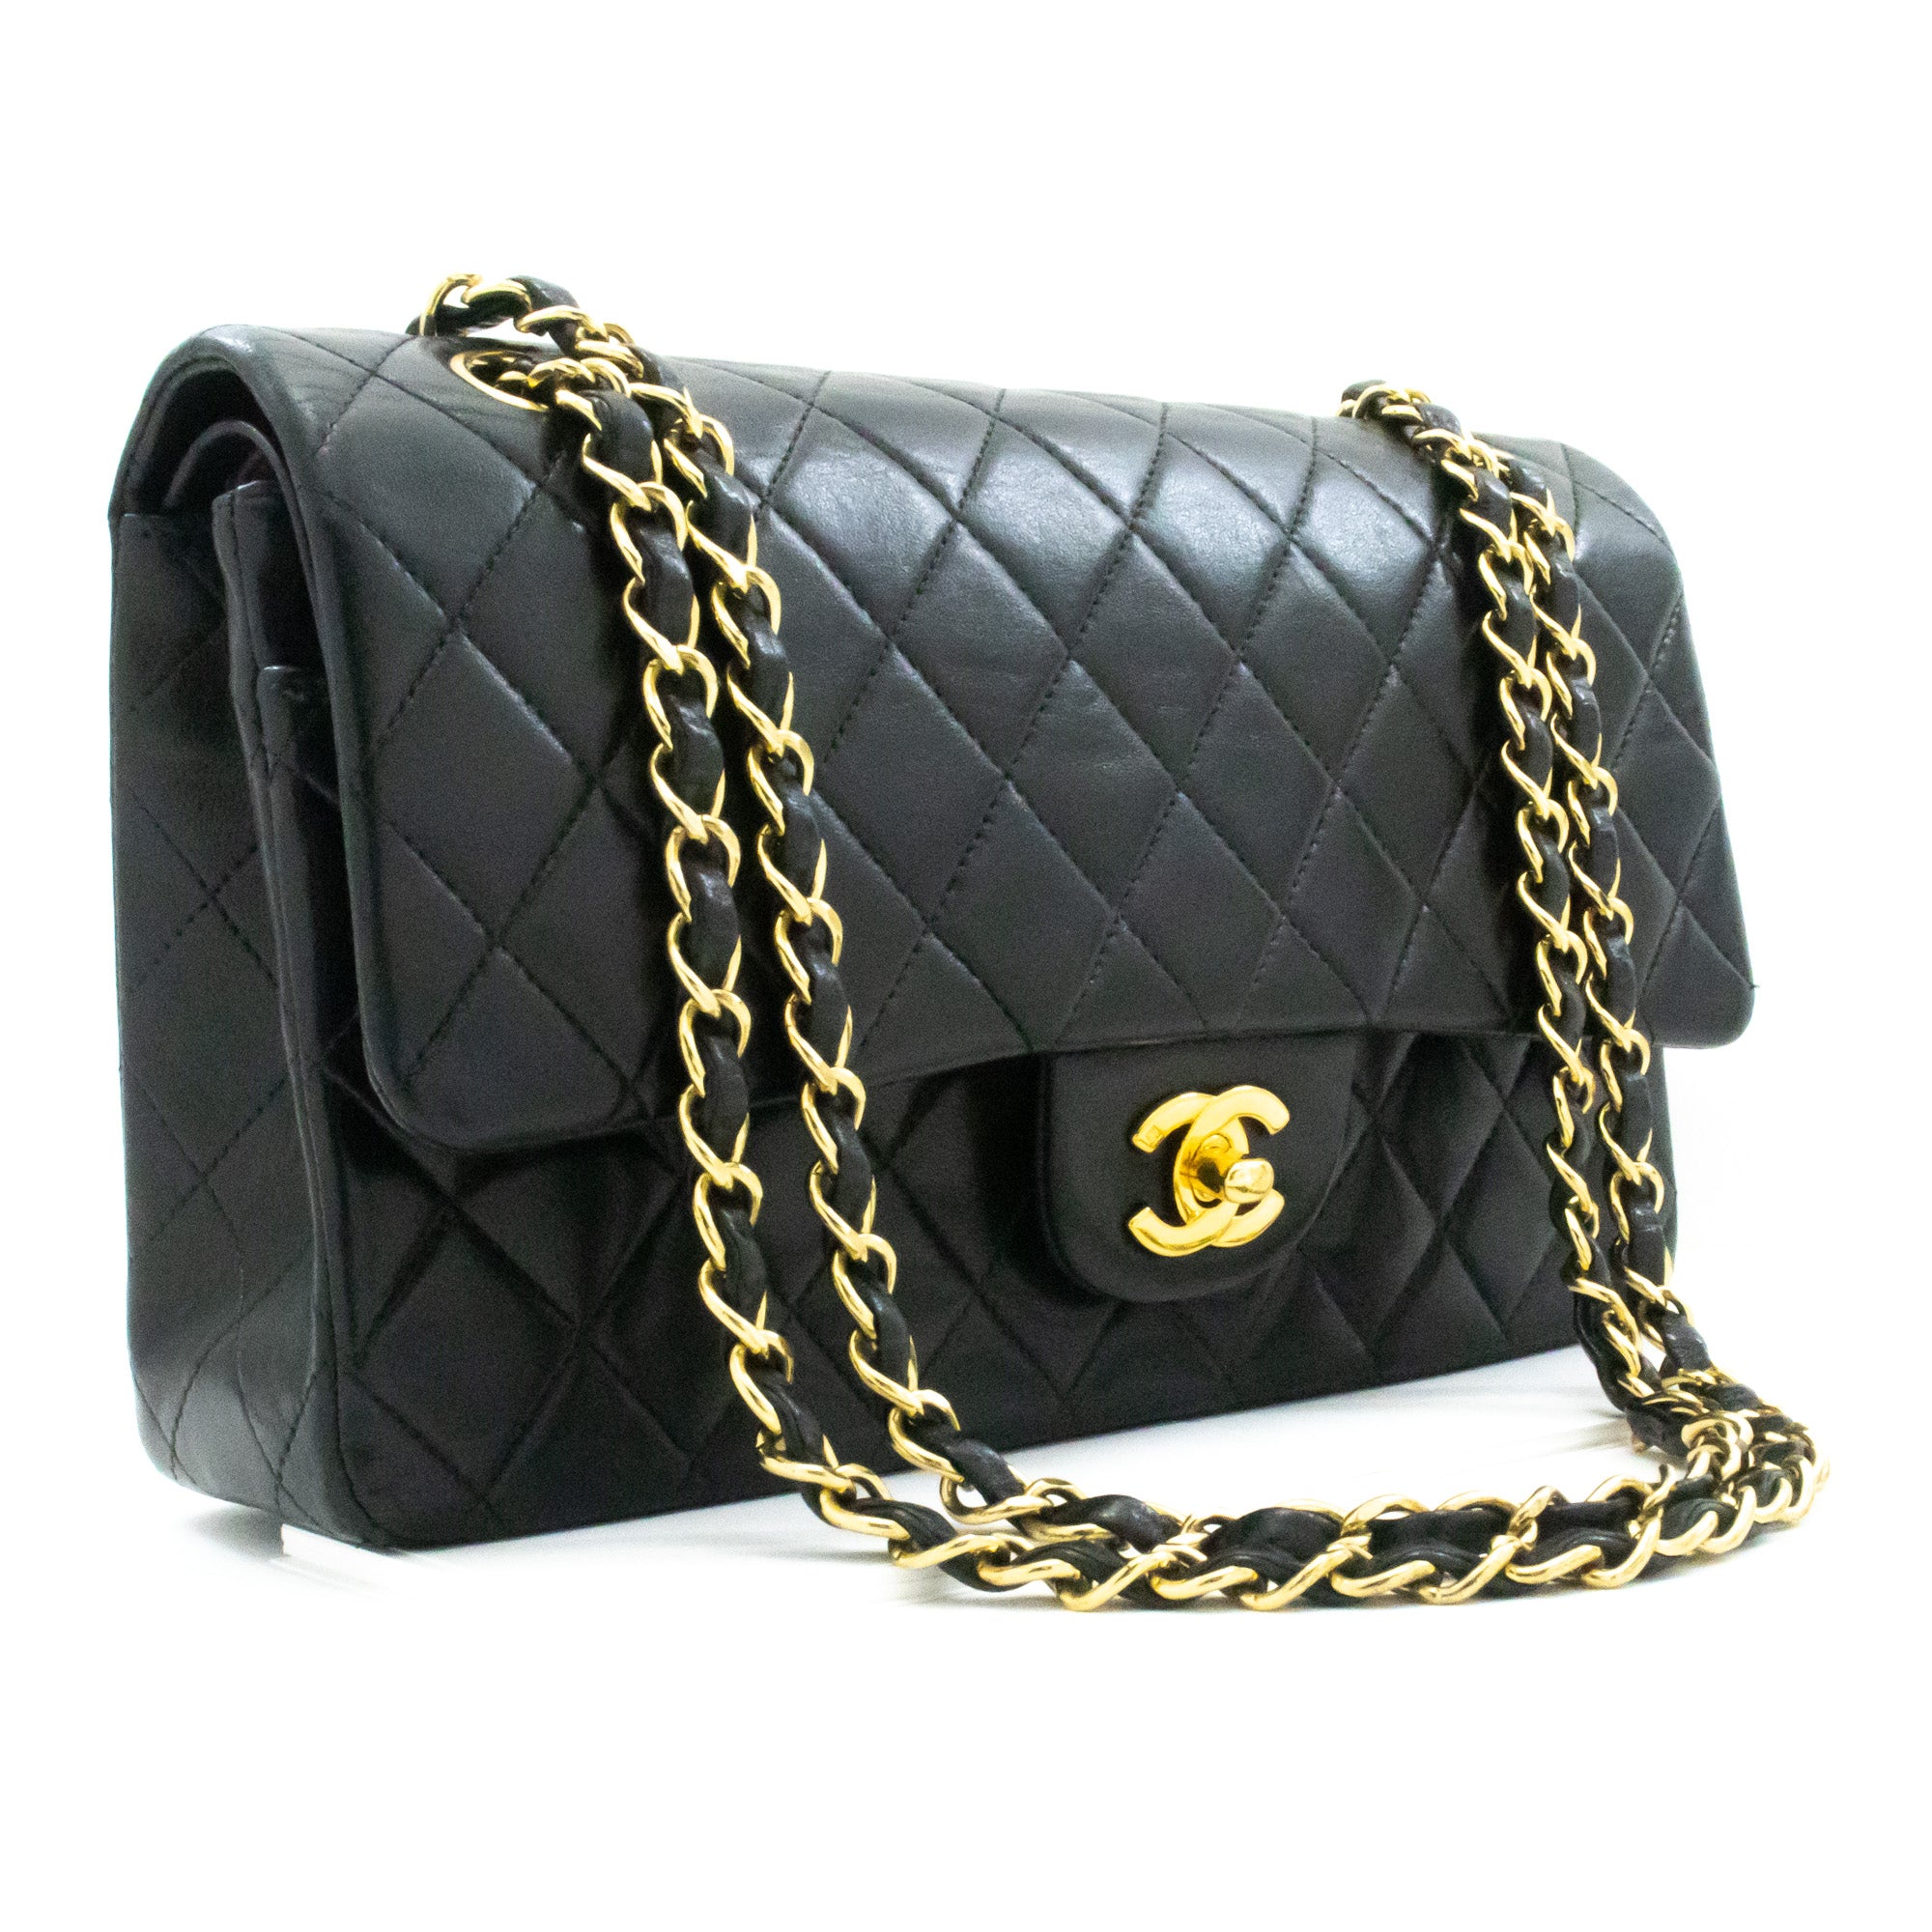 Black Quilted Lambskin Jumbo Classic Double Flap Gold Hardware, 2011